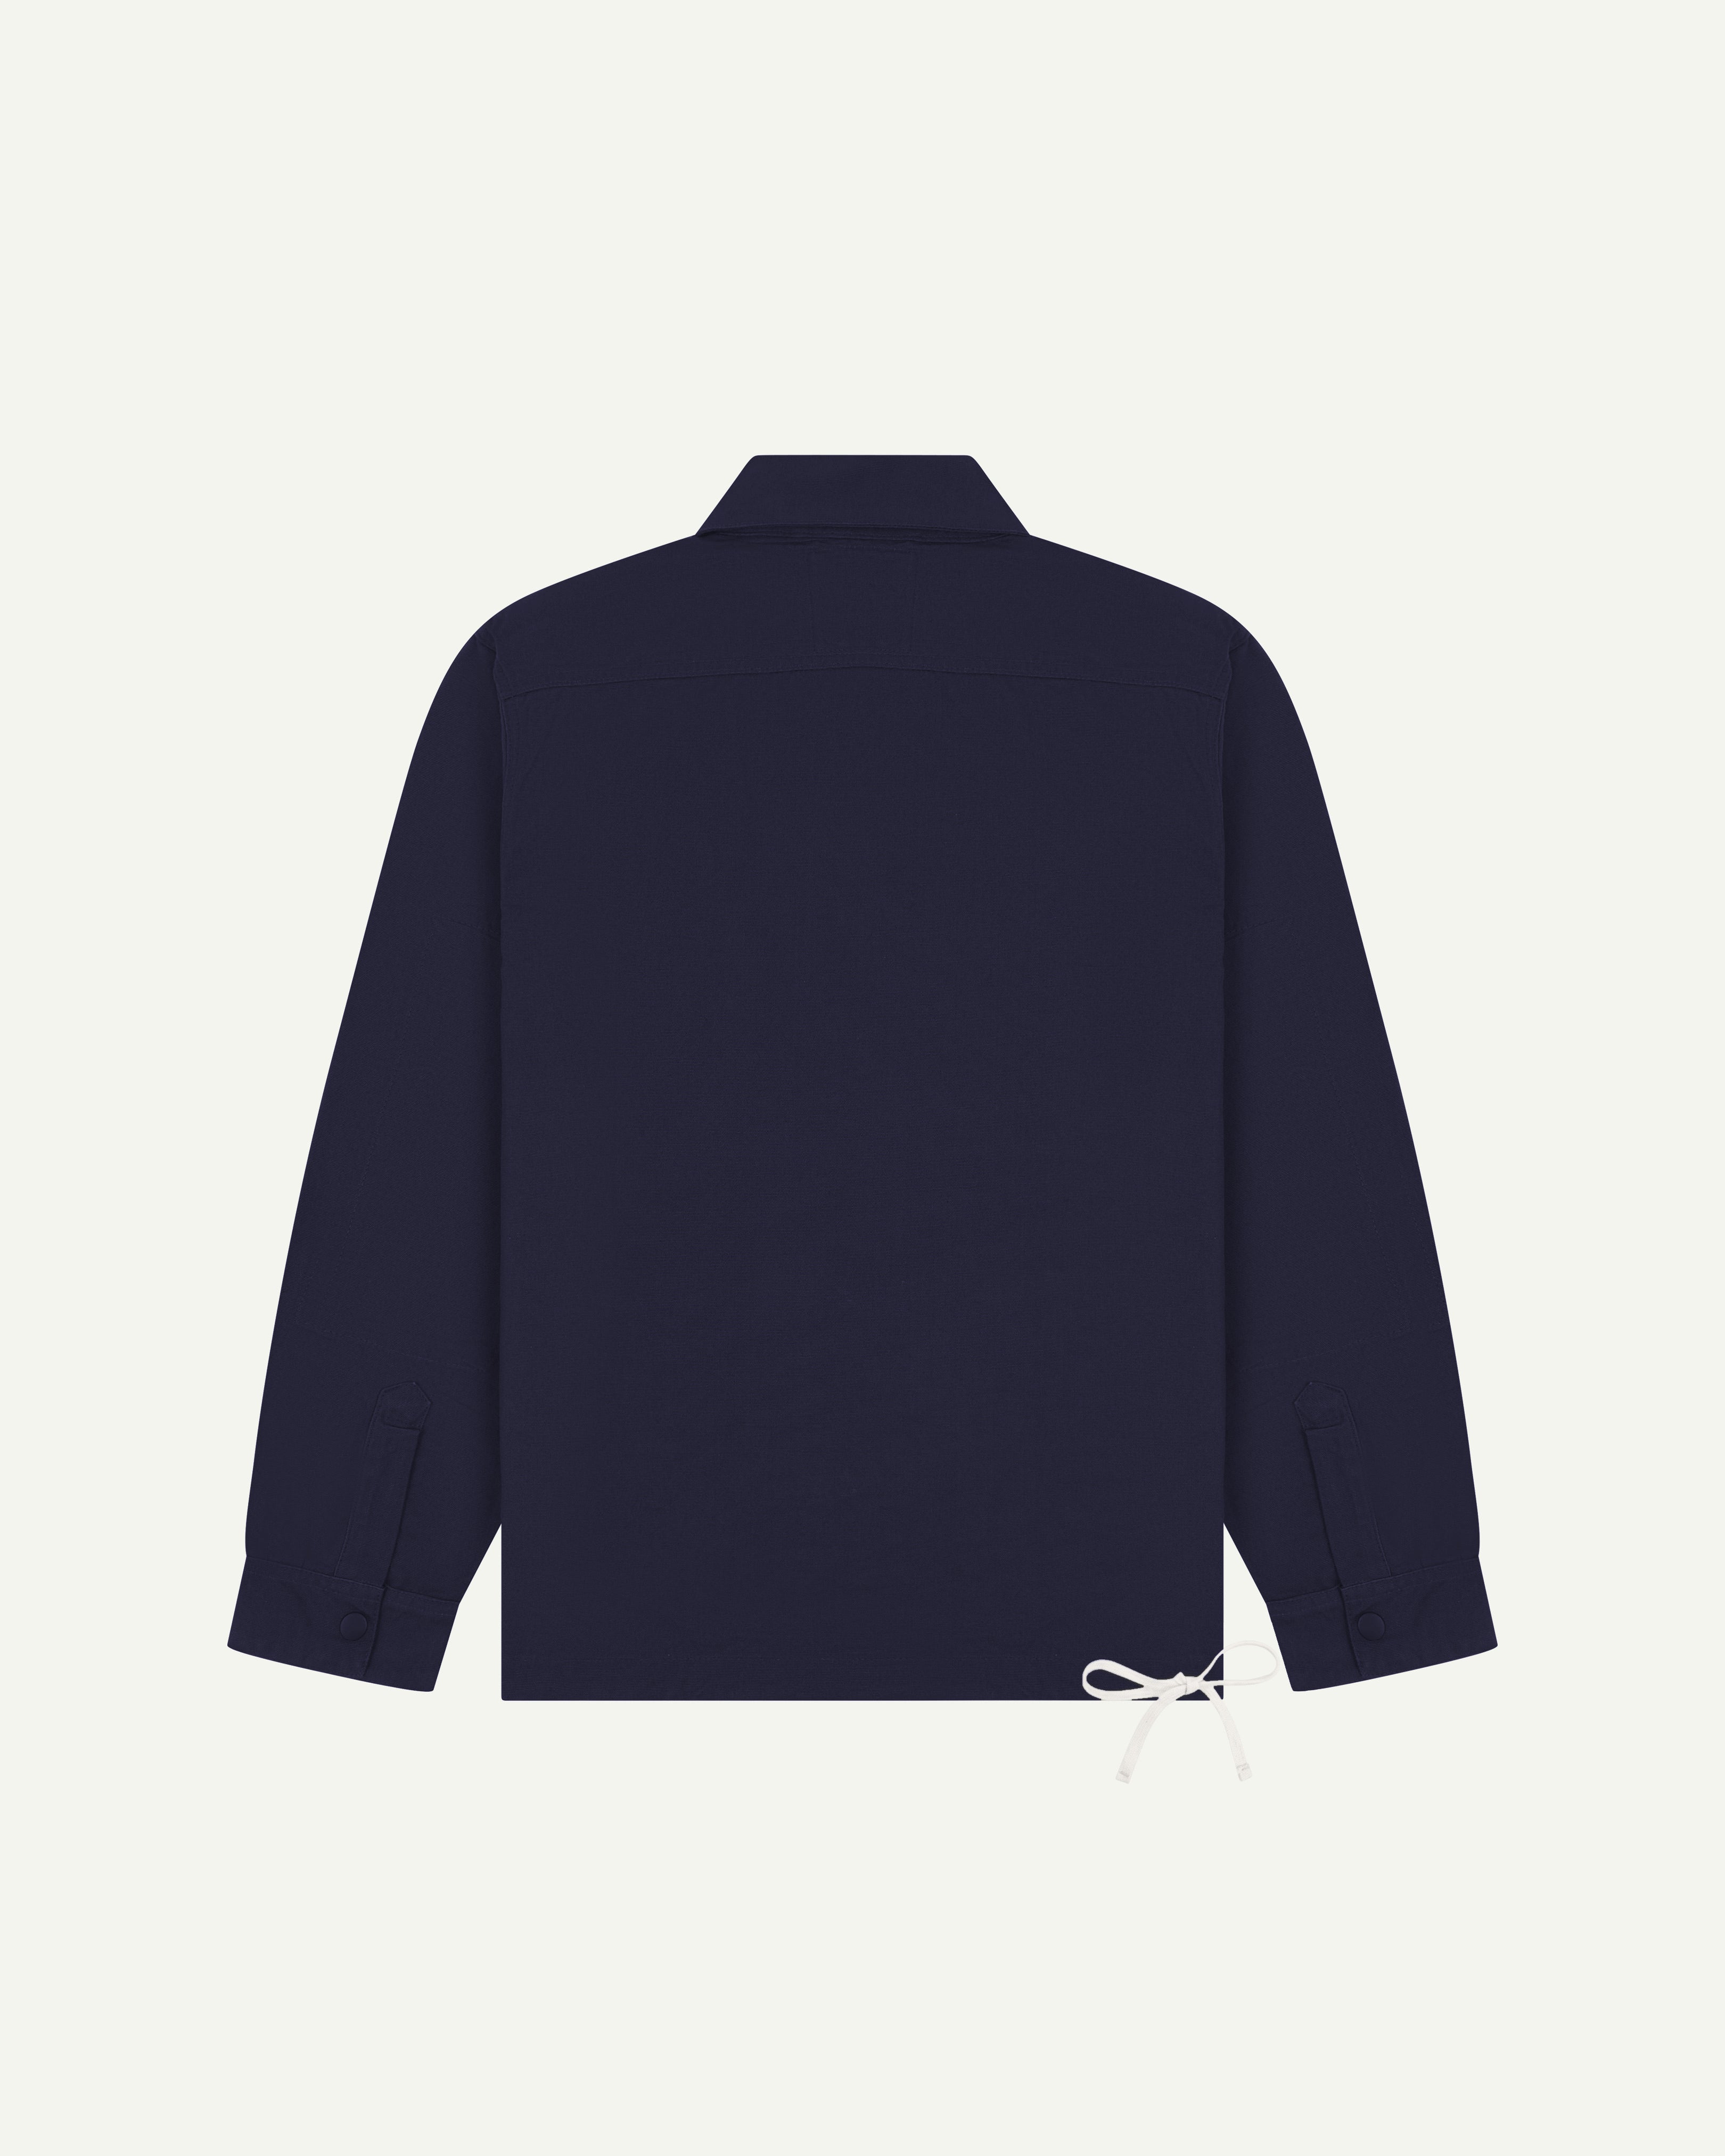 Back flat shot of Uskees #3013 jacket in midnight blue.